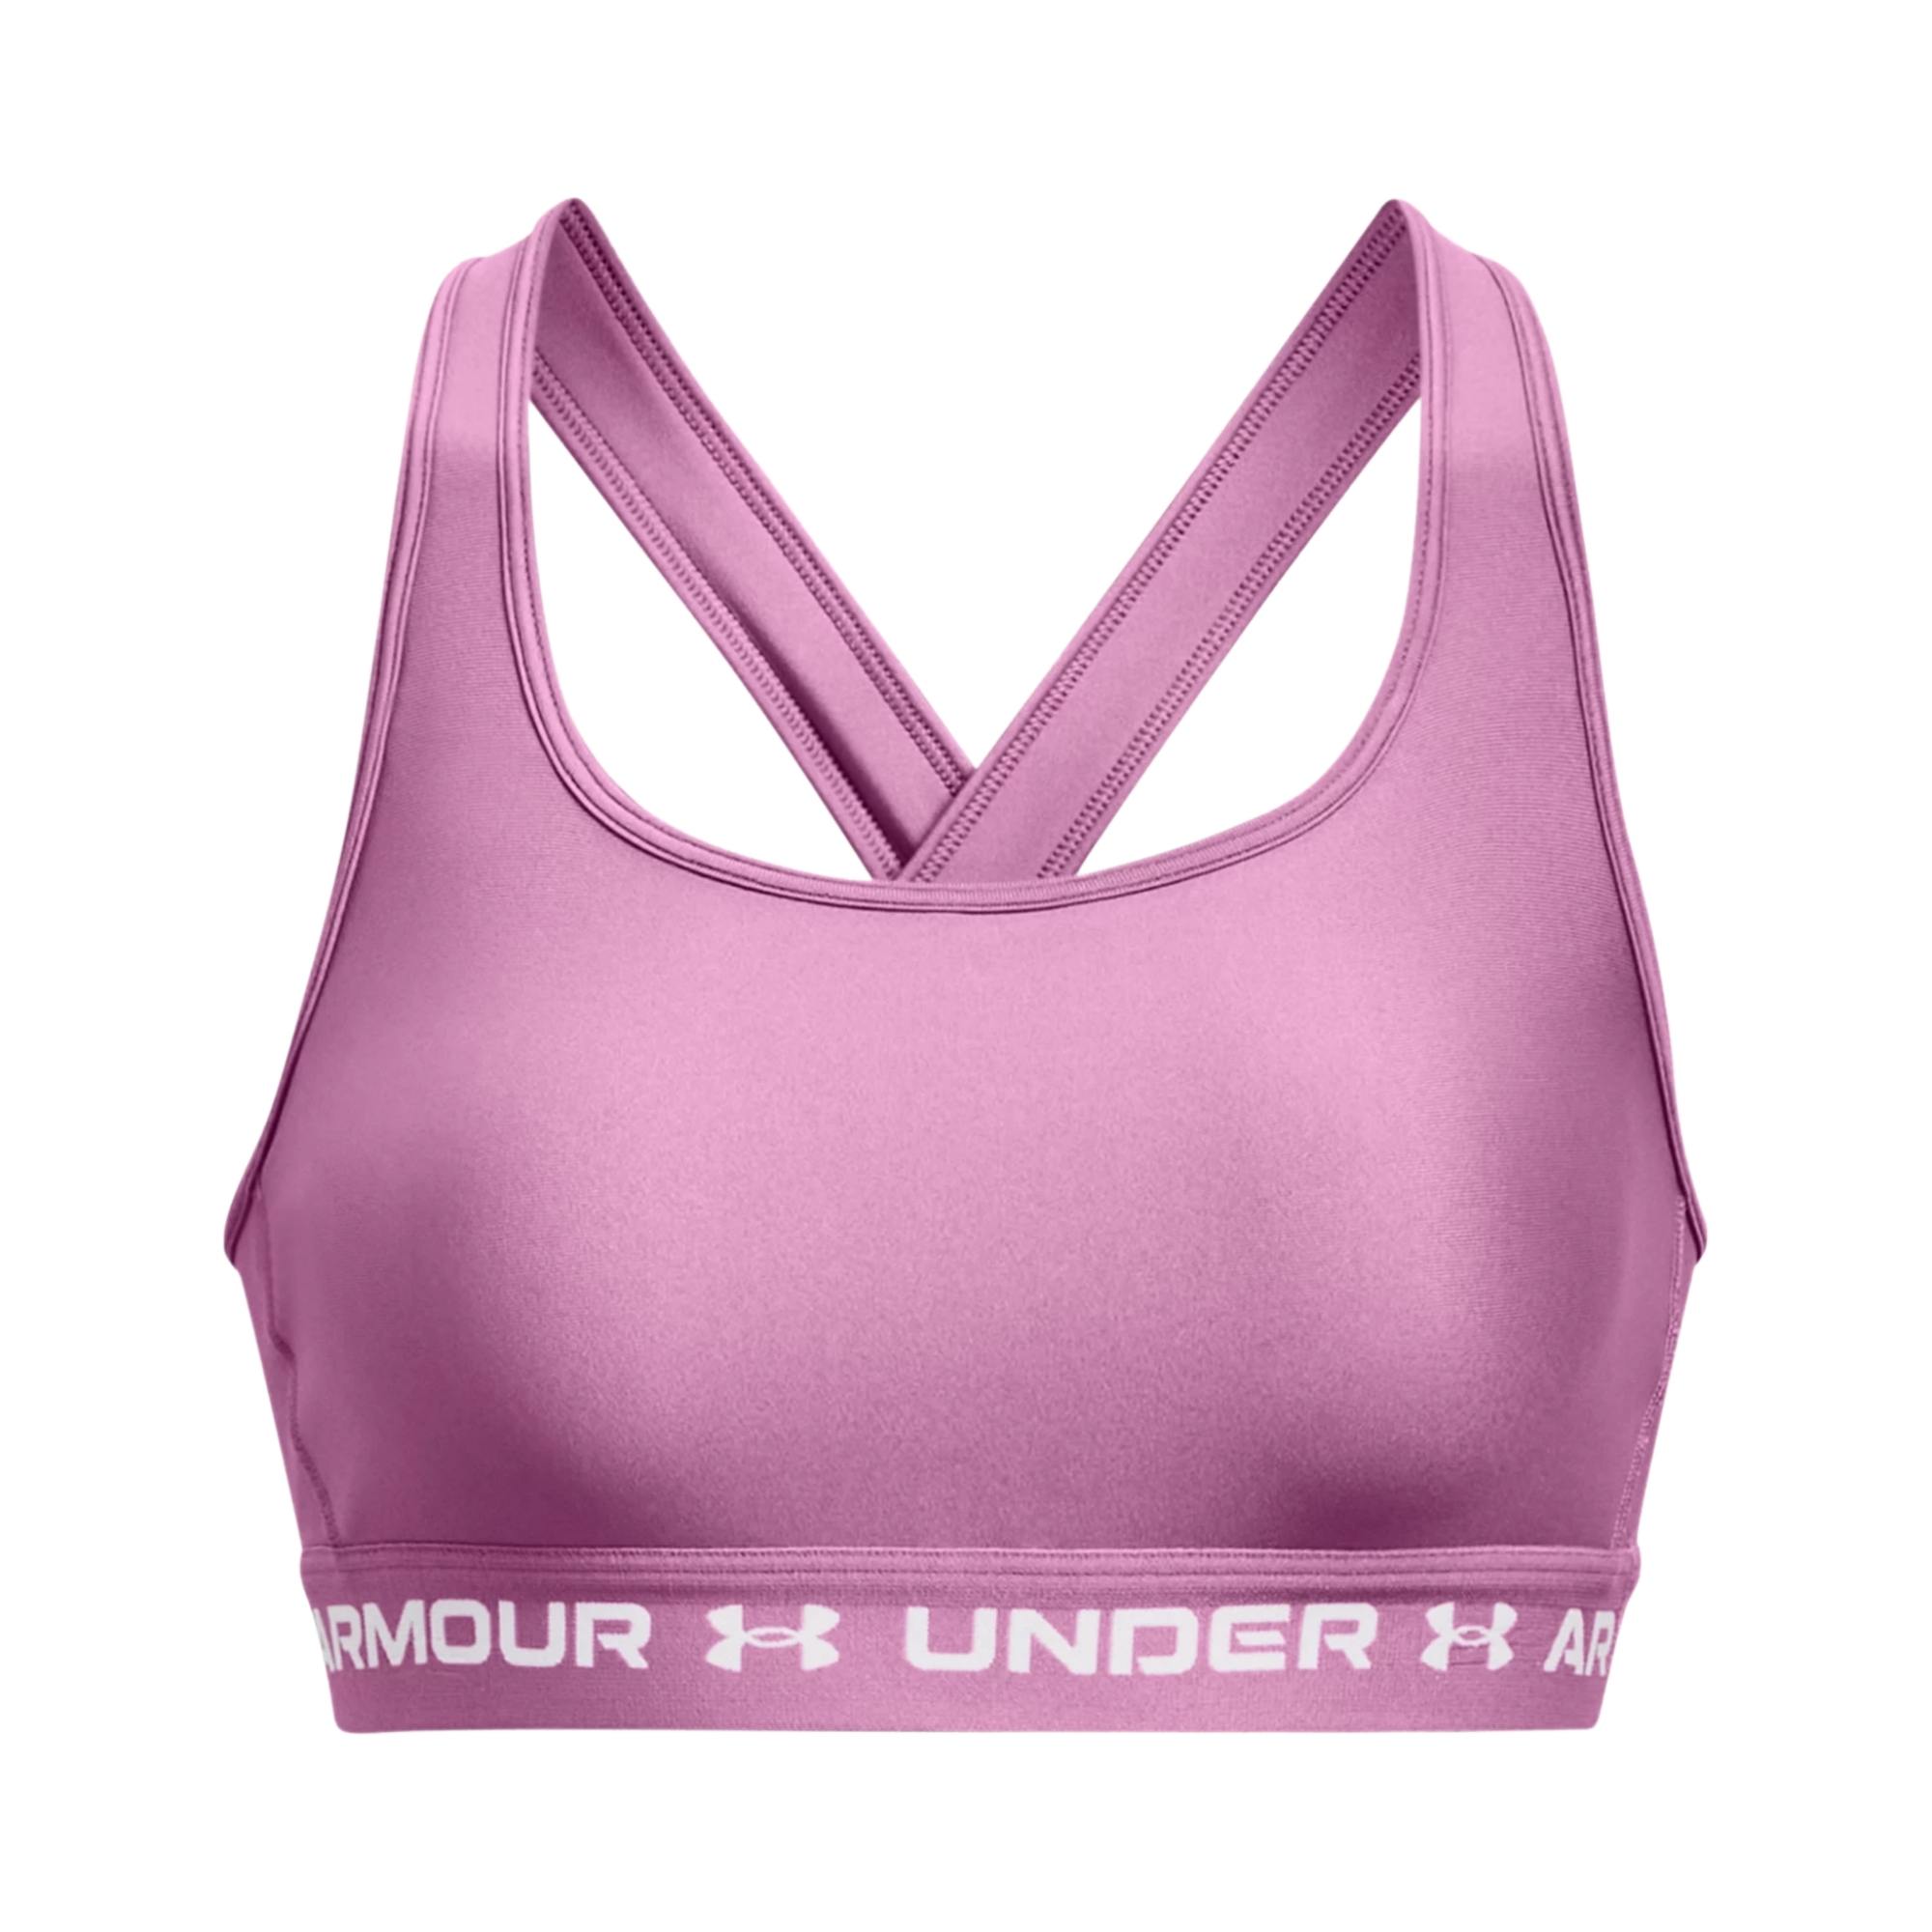 UNDER ARMOUR WOMENS MID CROSSBACK SPORTS BRA SIZE LARGE 1360305 655 Powder  Pink